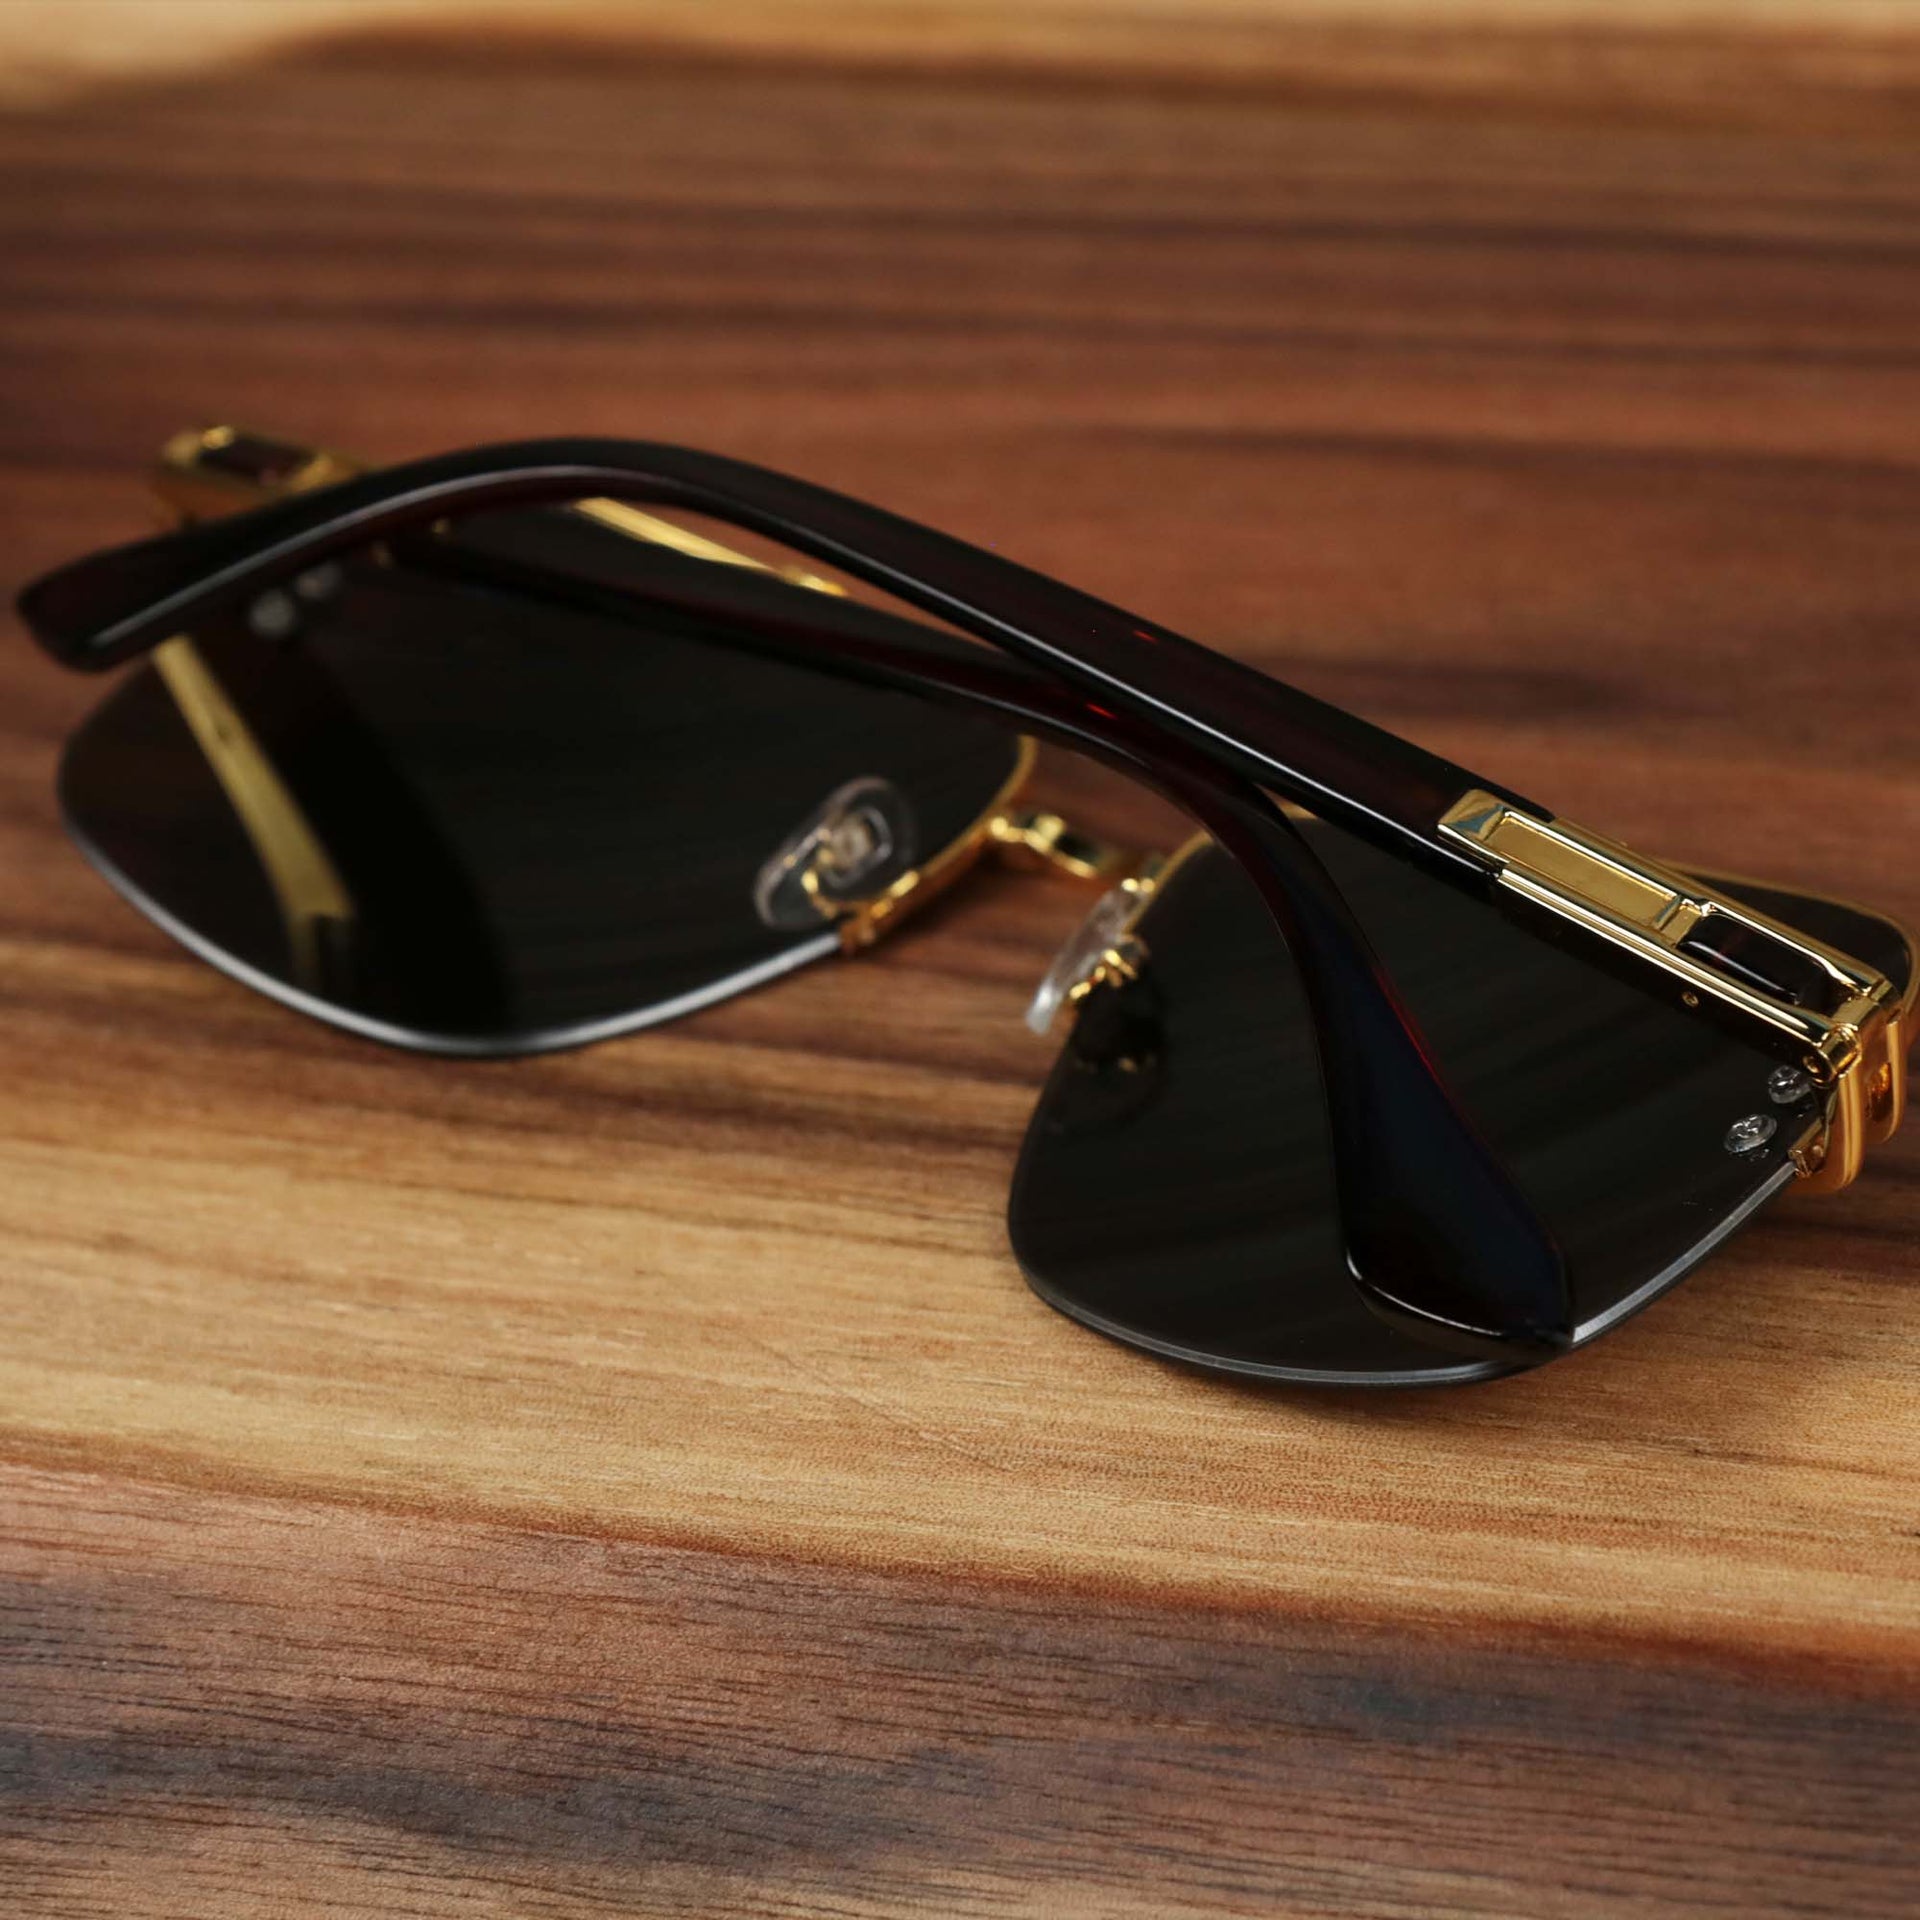 The Round Rectangle Frame Black Lens Sunglasses with Gold Frame folded up